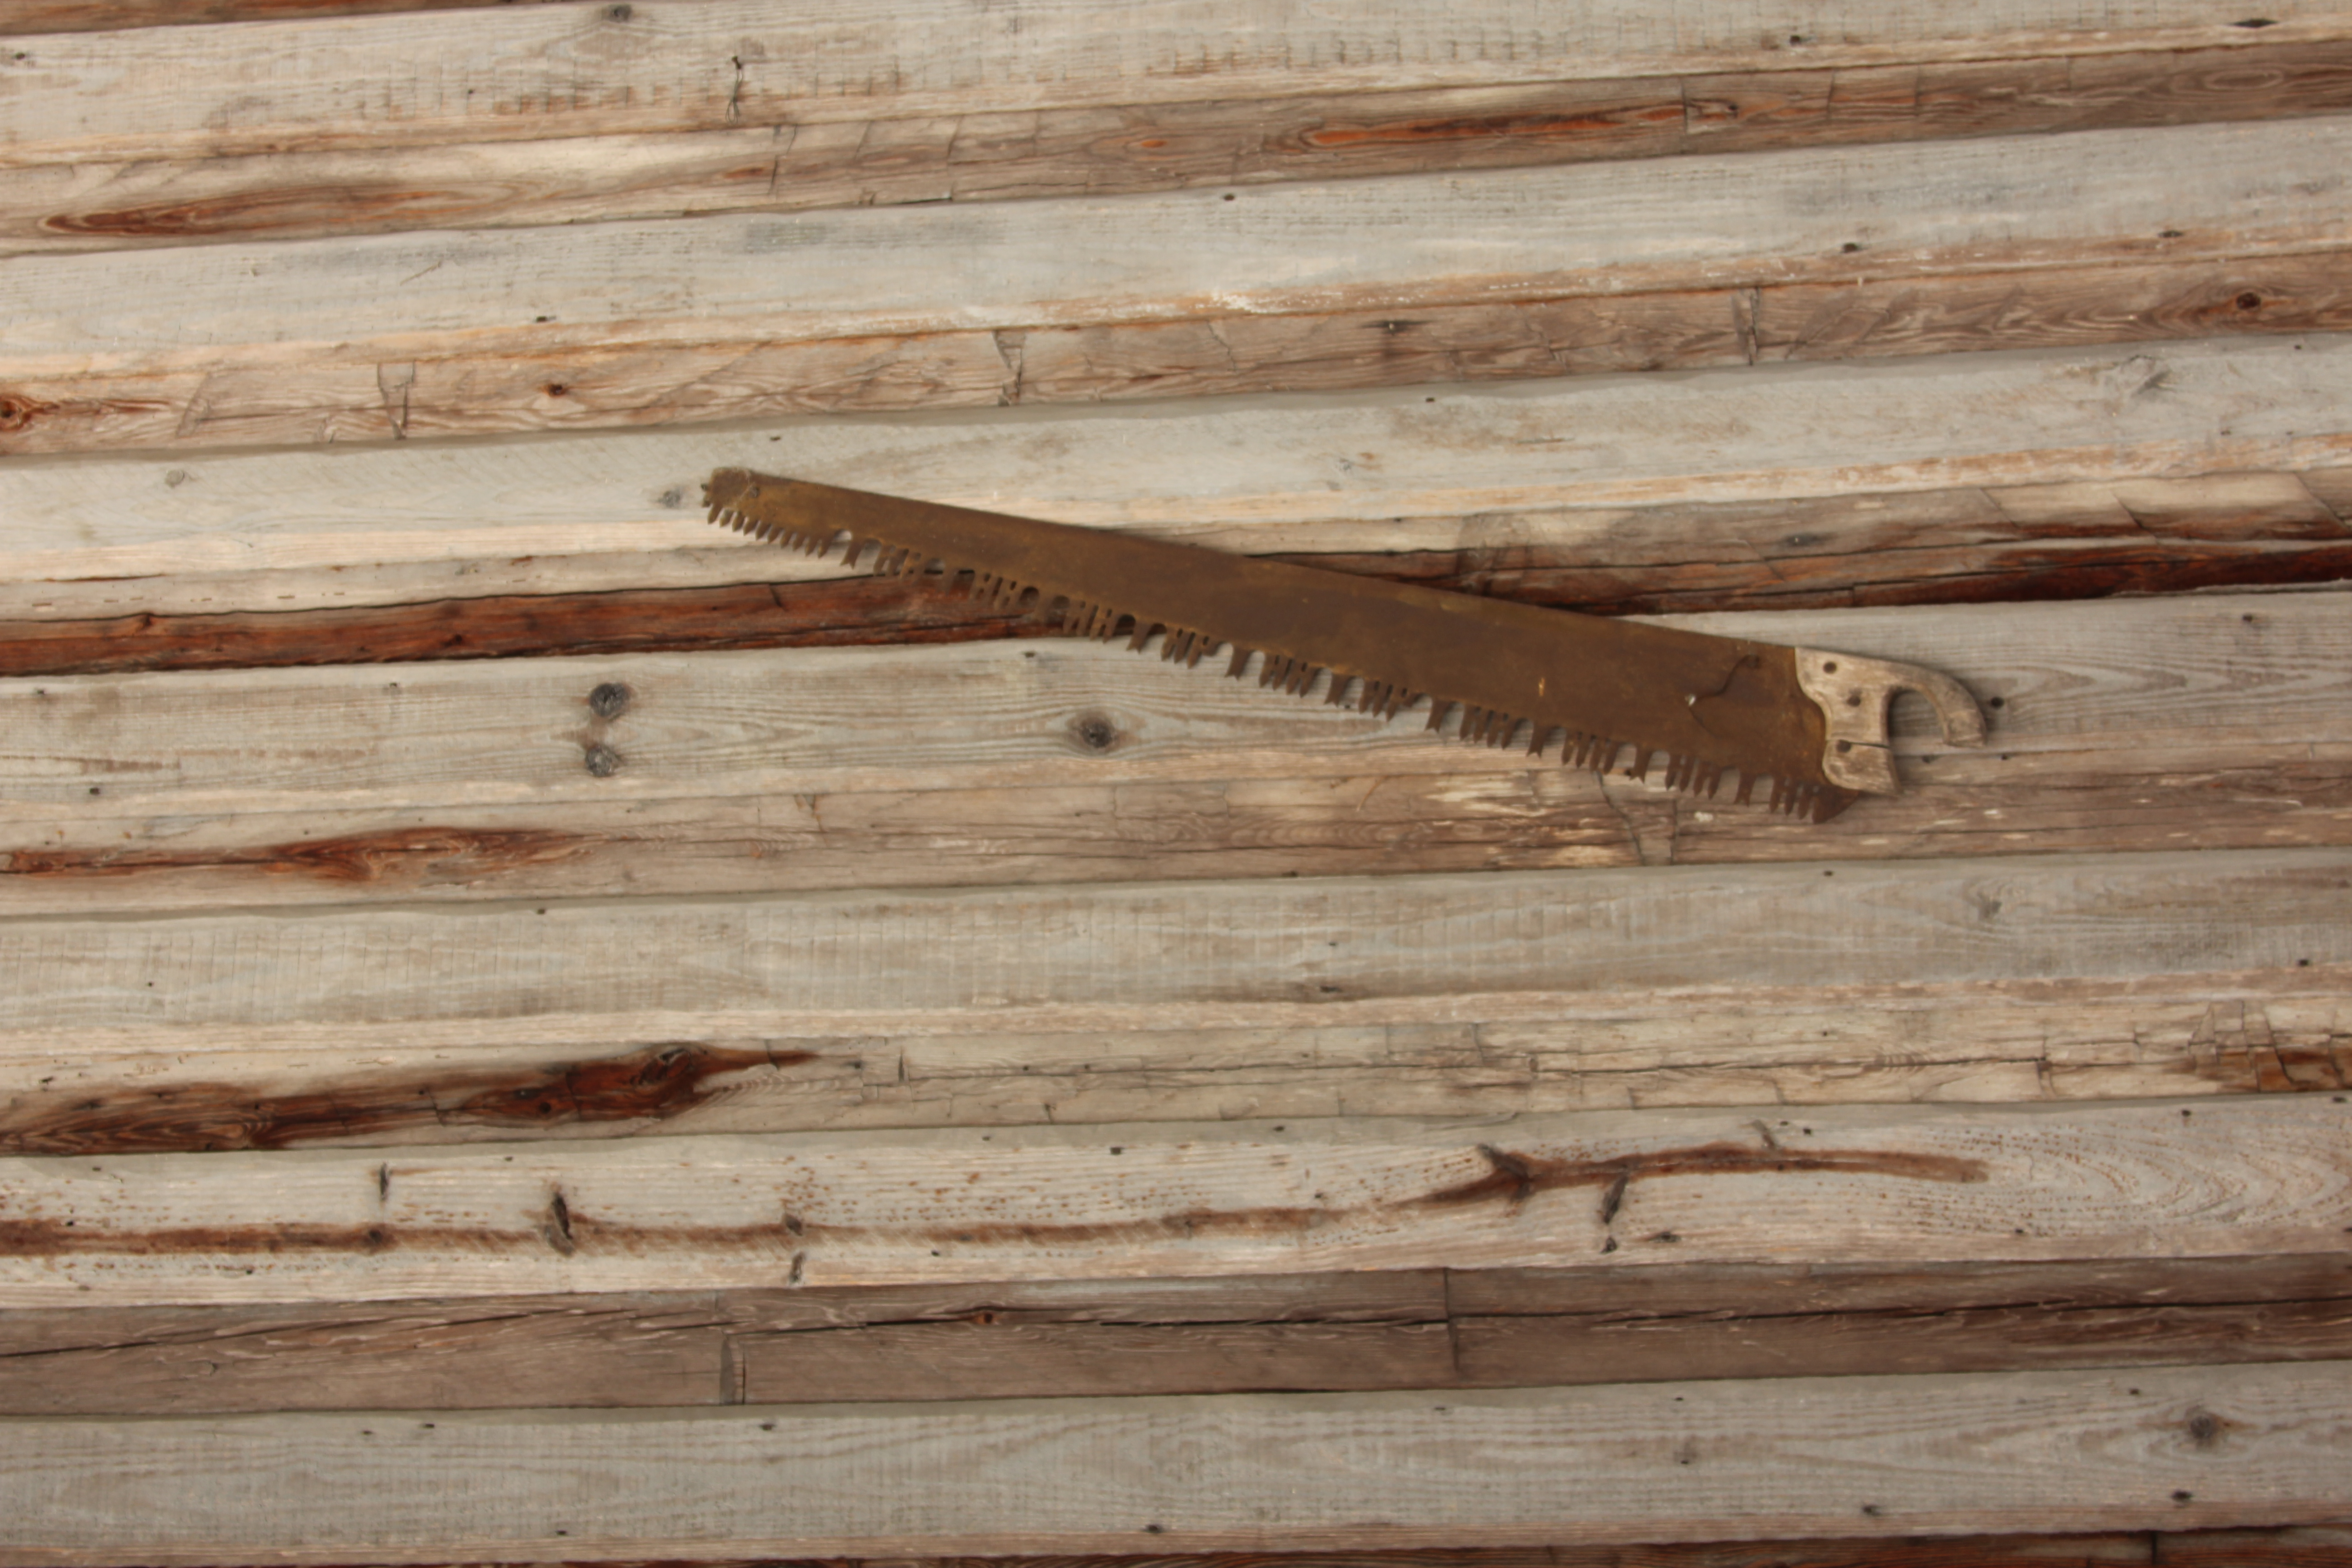 an antique handsaw hung on a wooden wall.